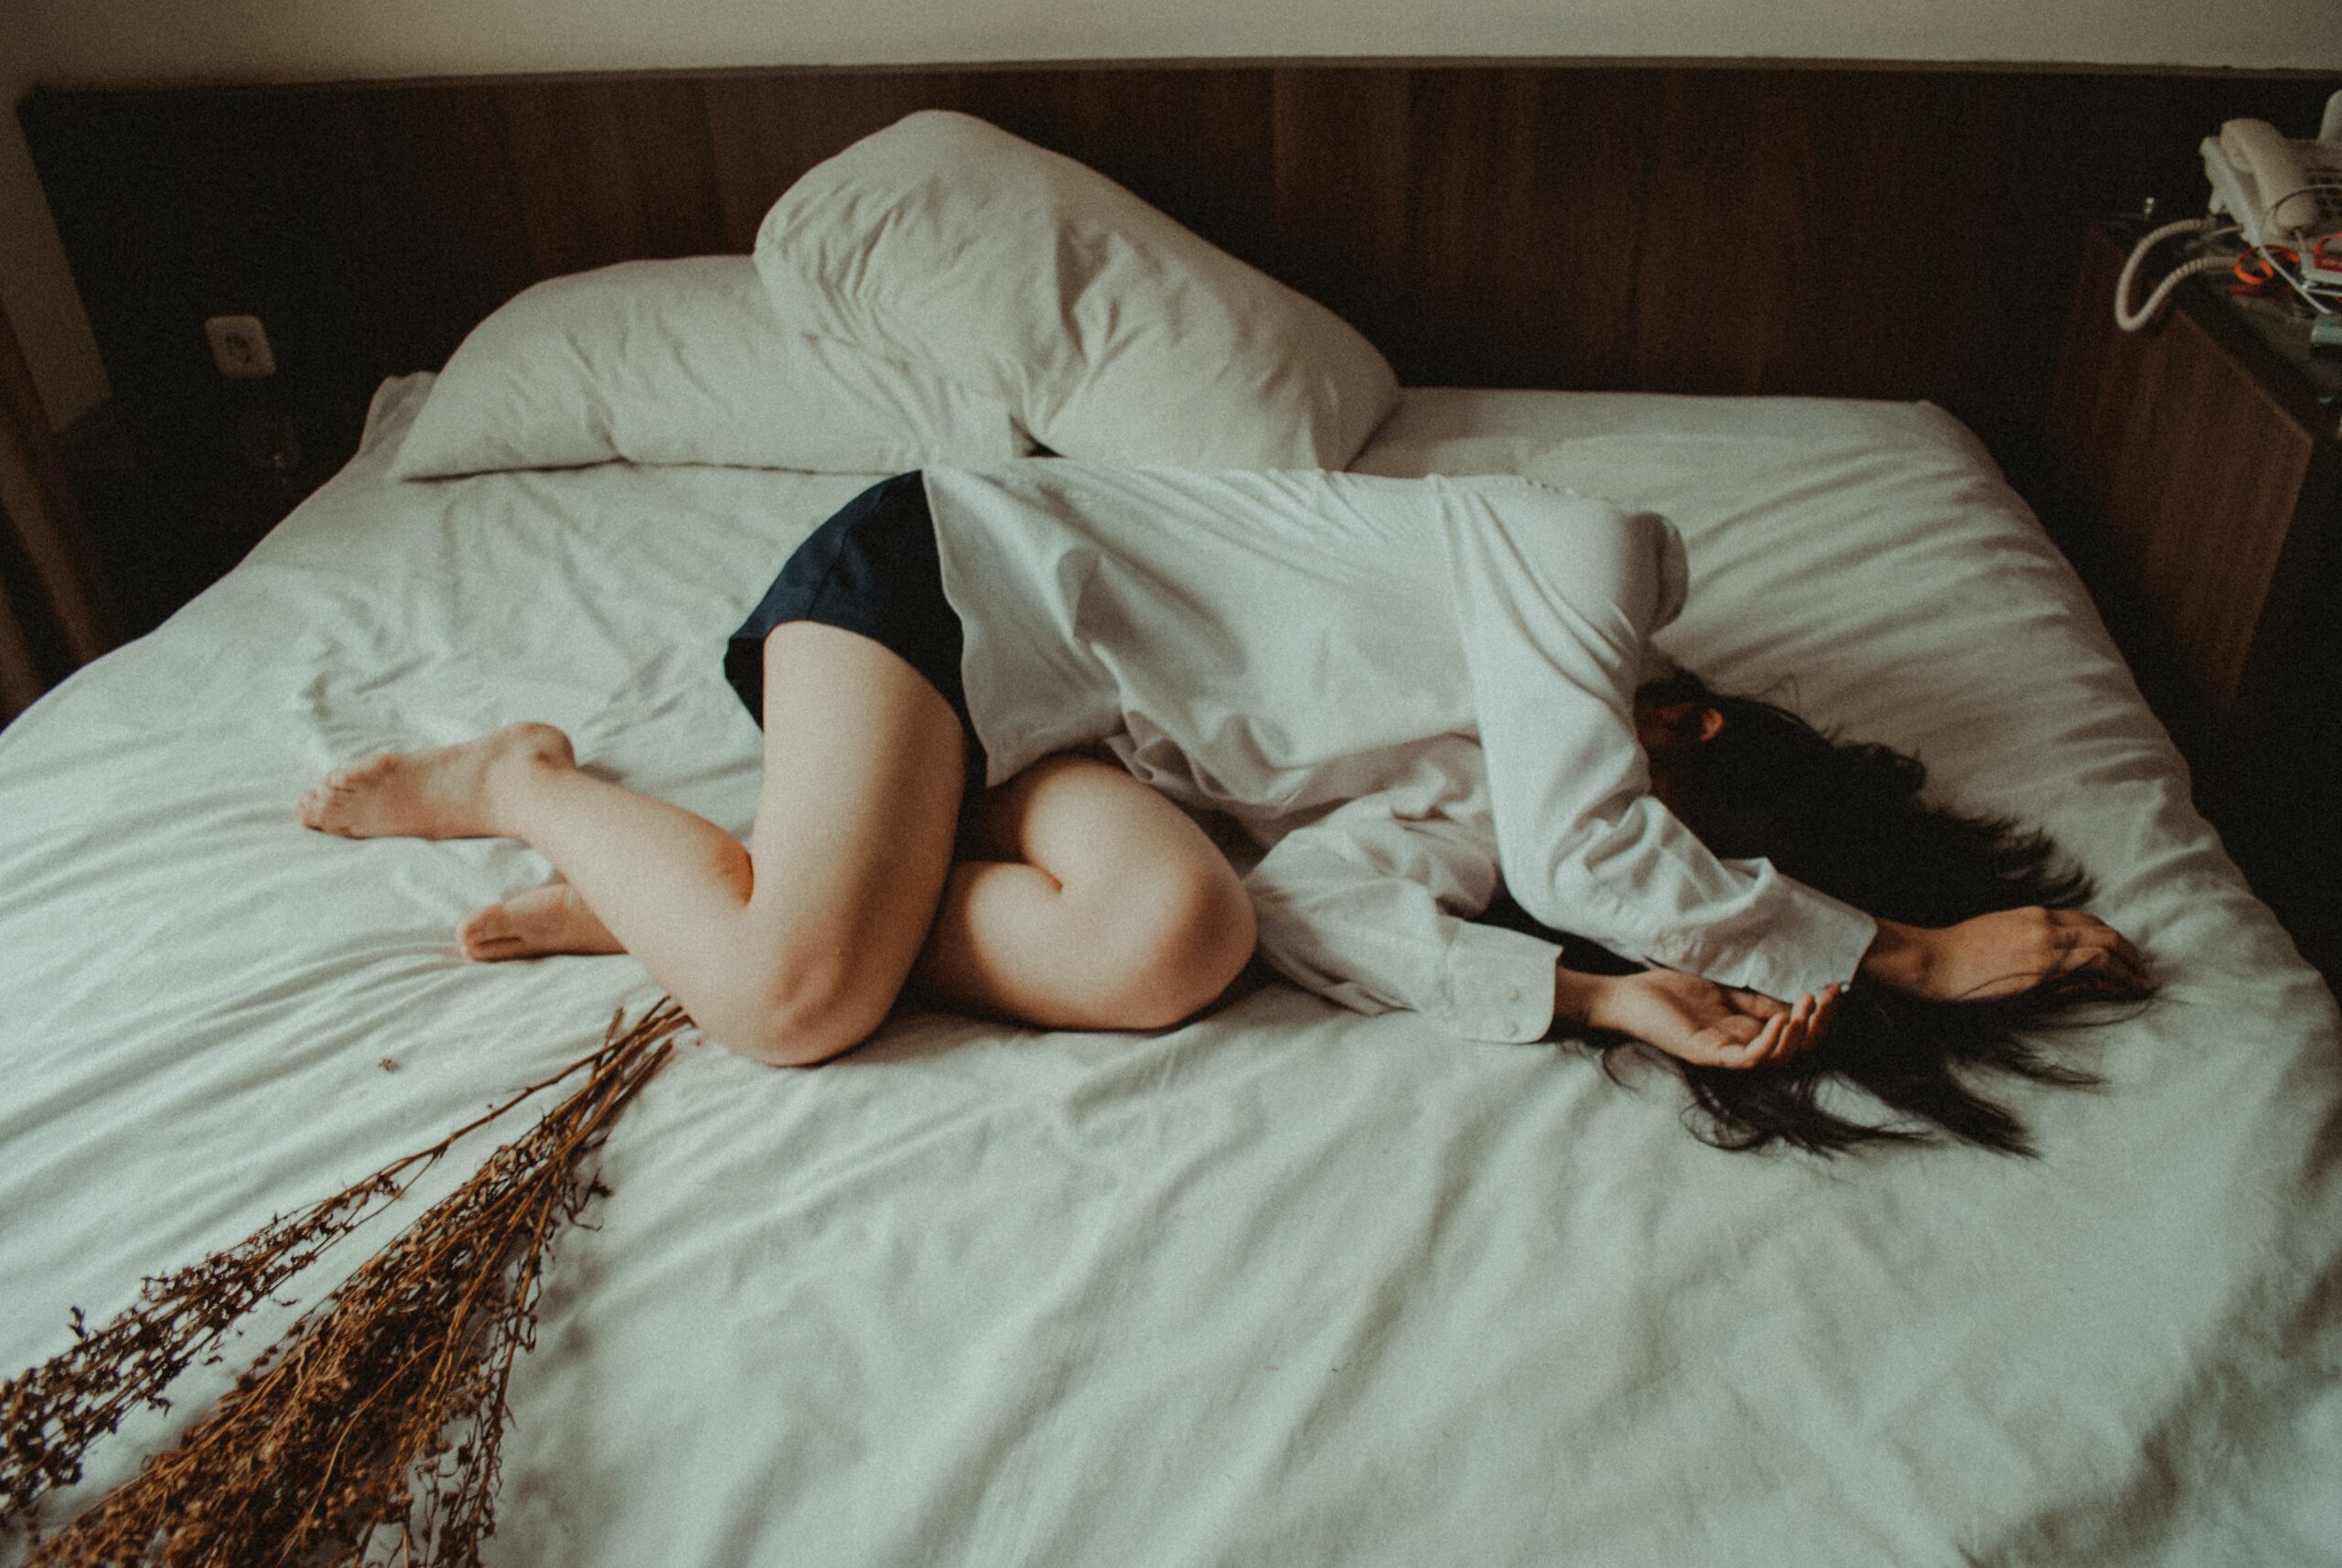 is it normal to have a painful period?